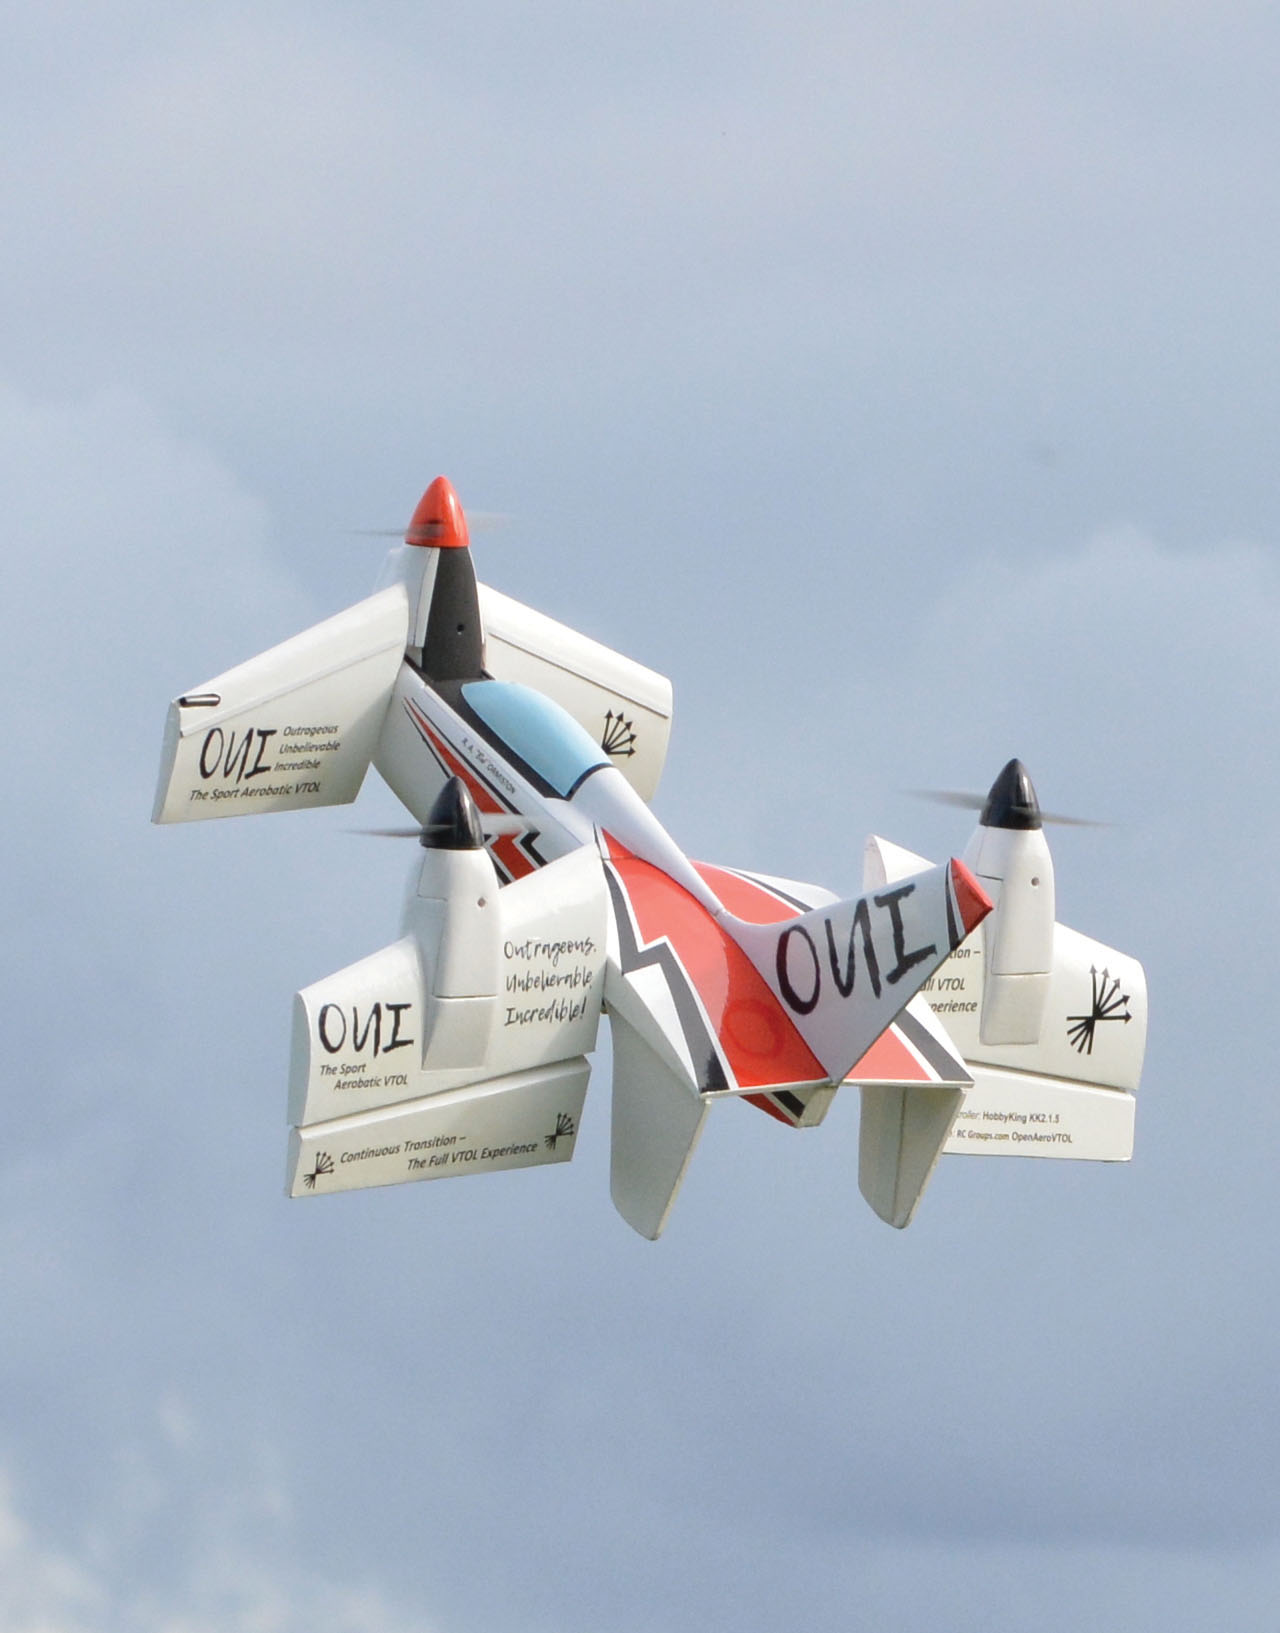 the oui is shown in a stationary hover pitched